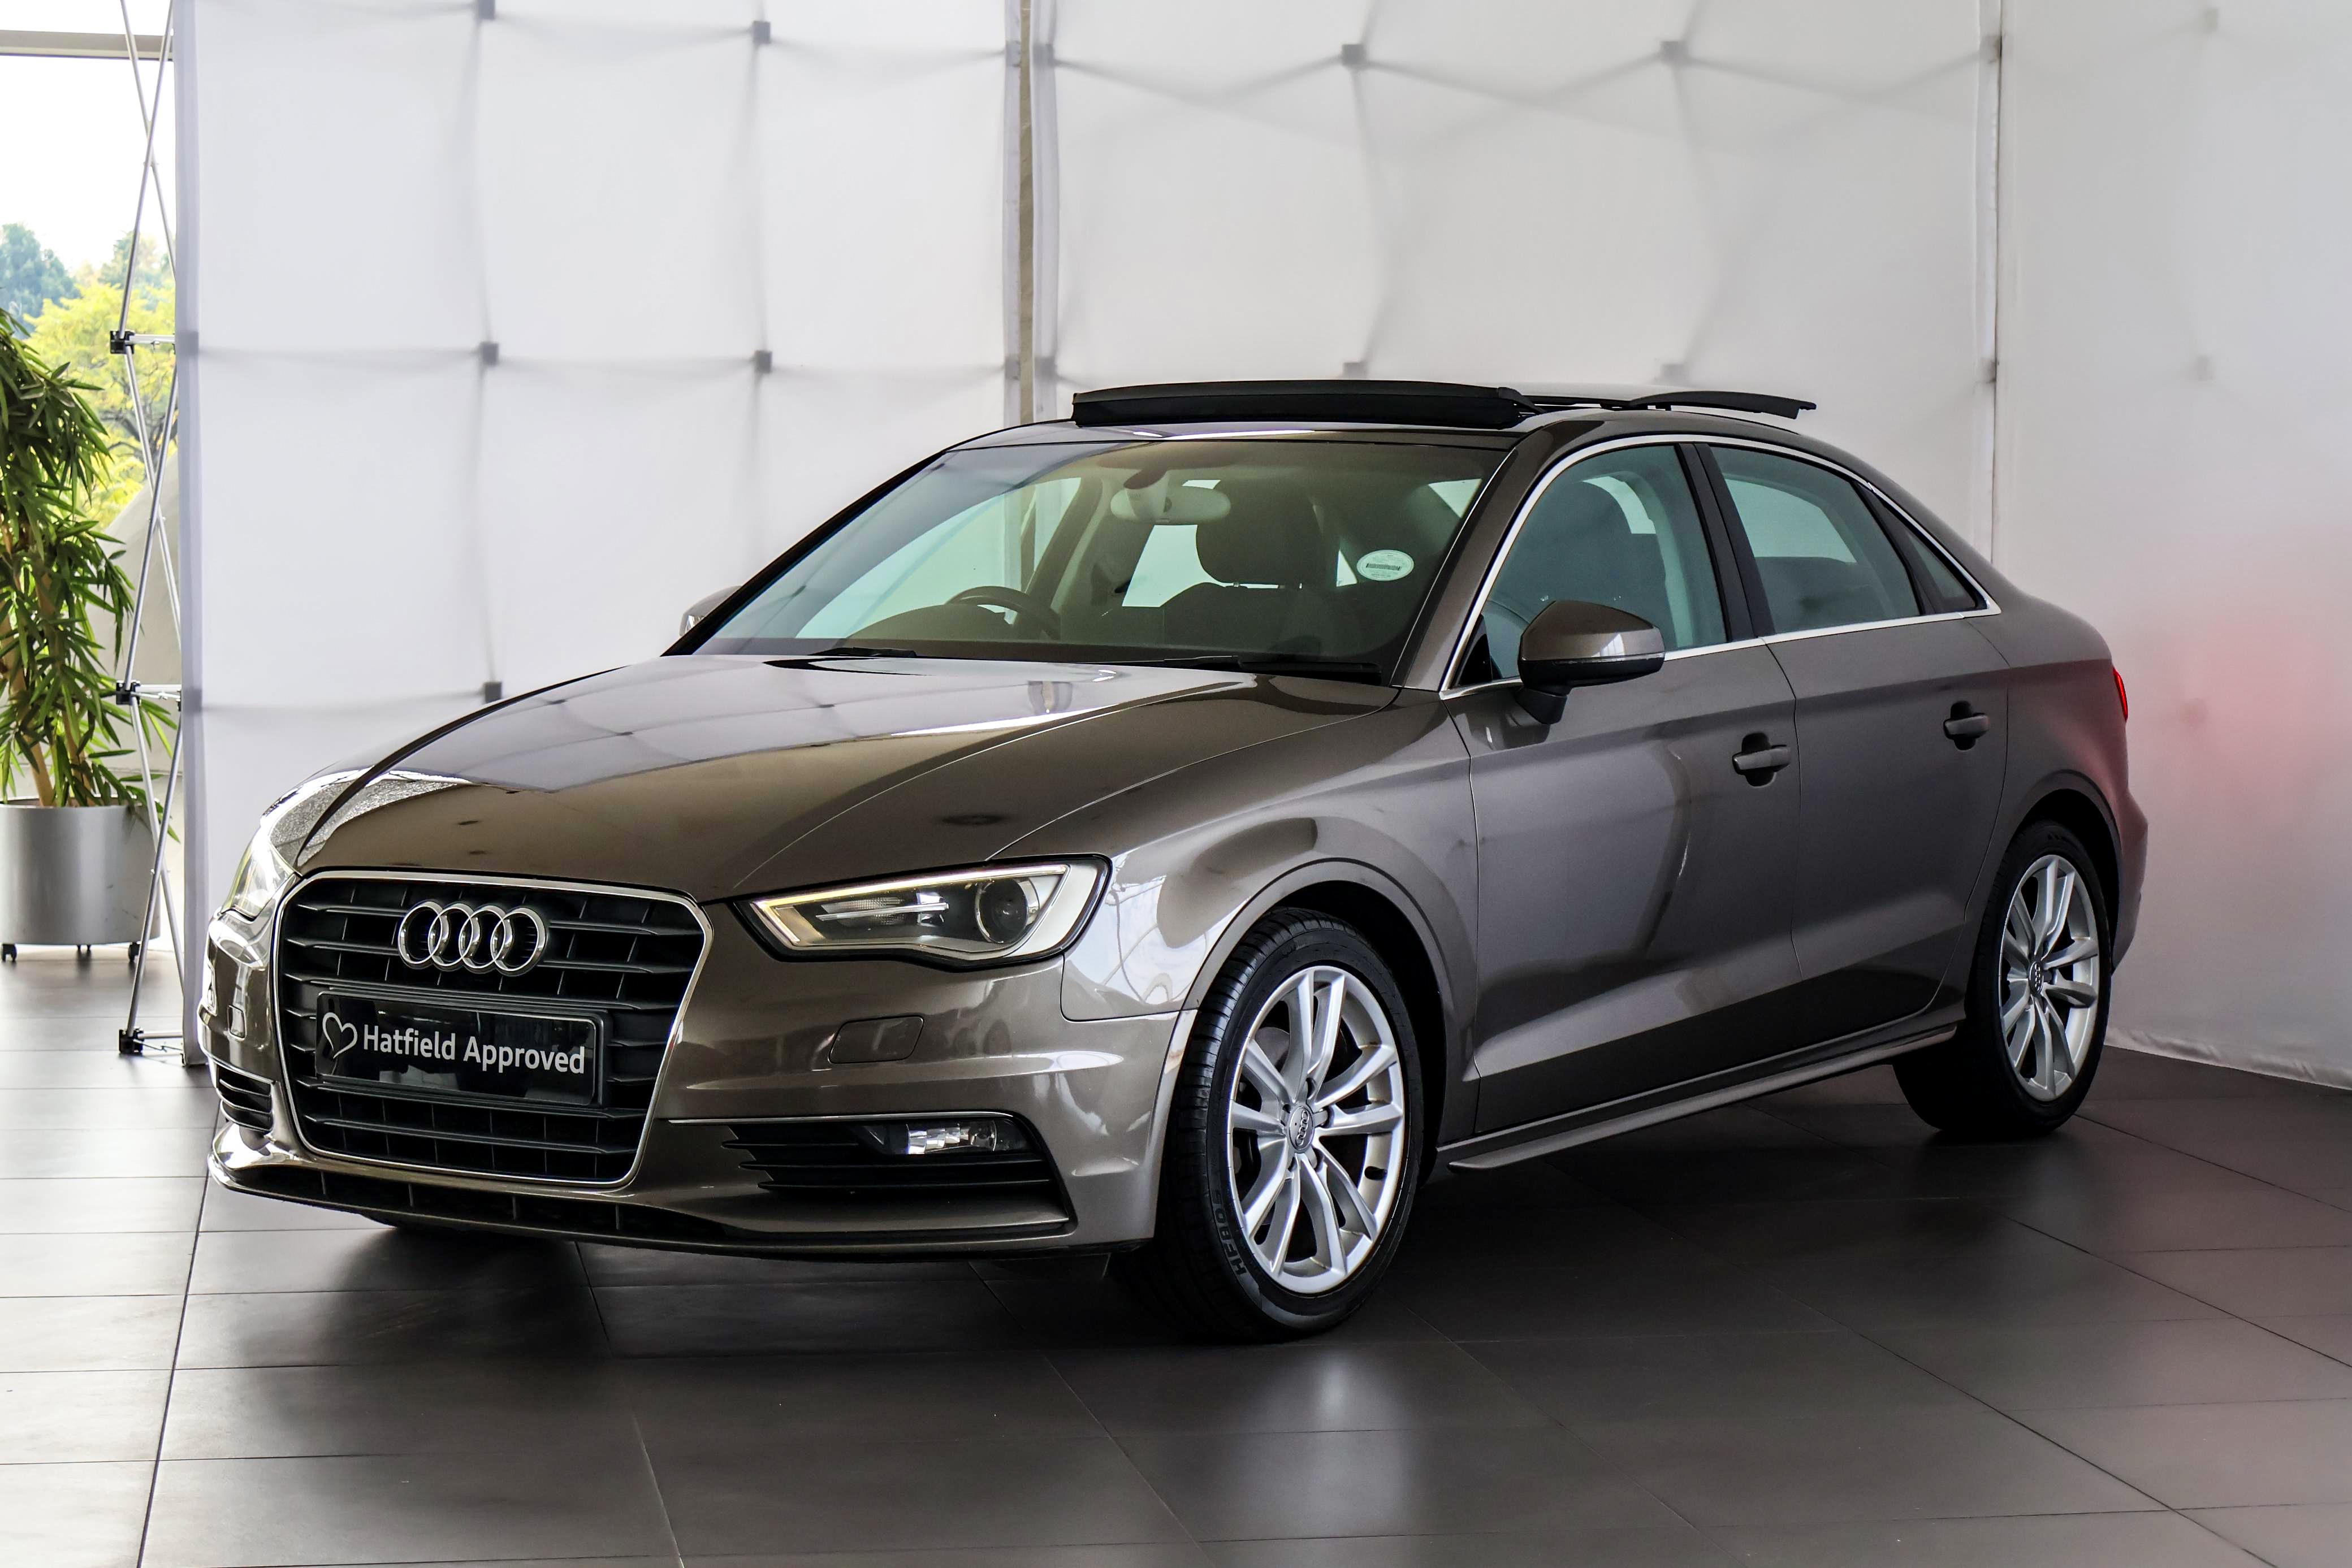 2015 Audi A3  for sale - 7388761